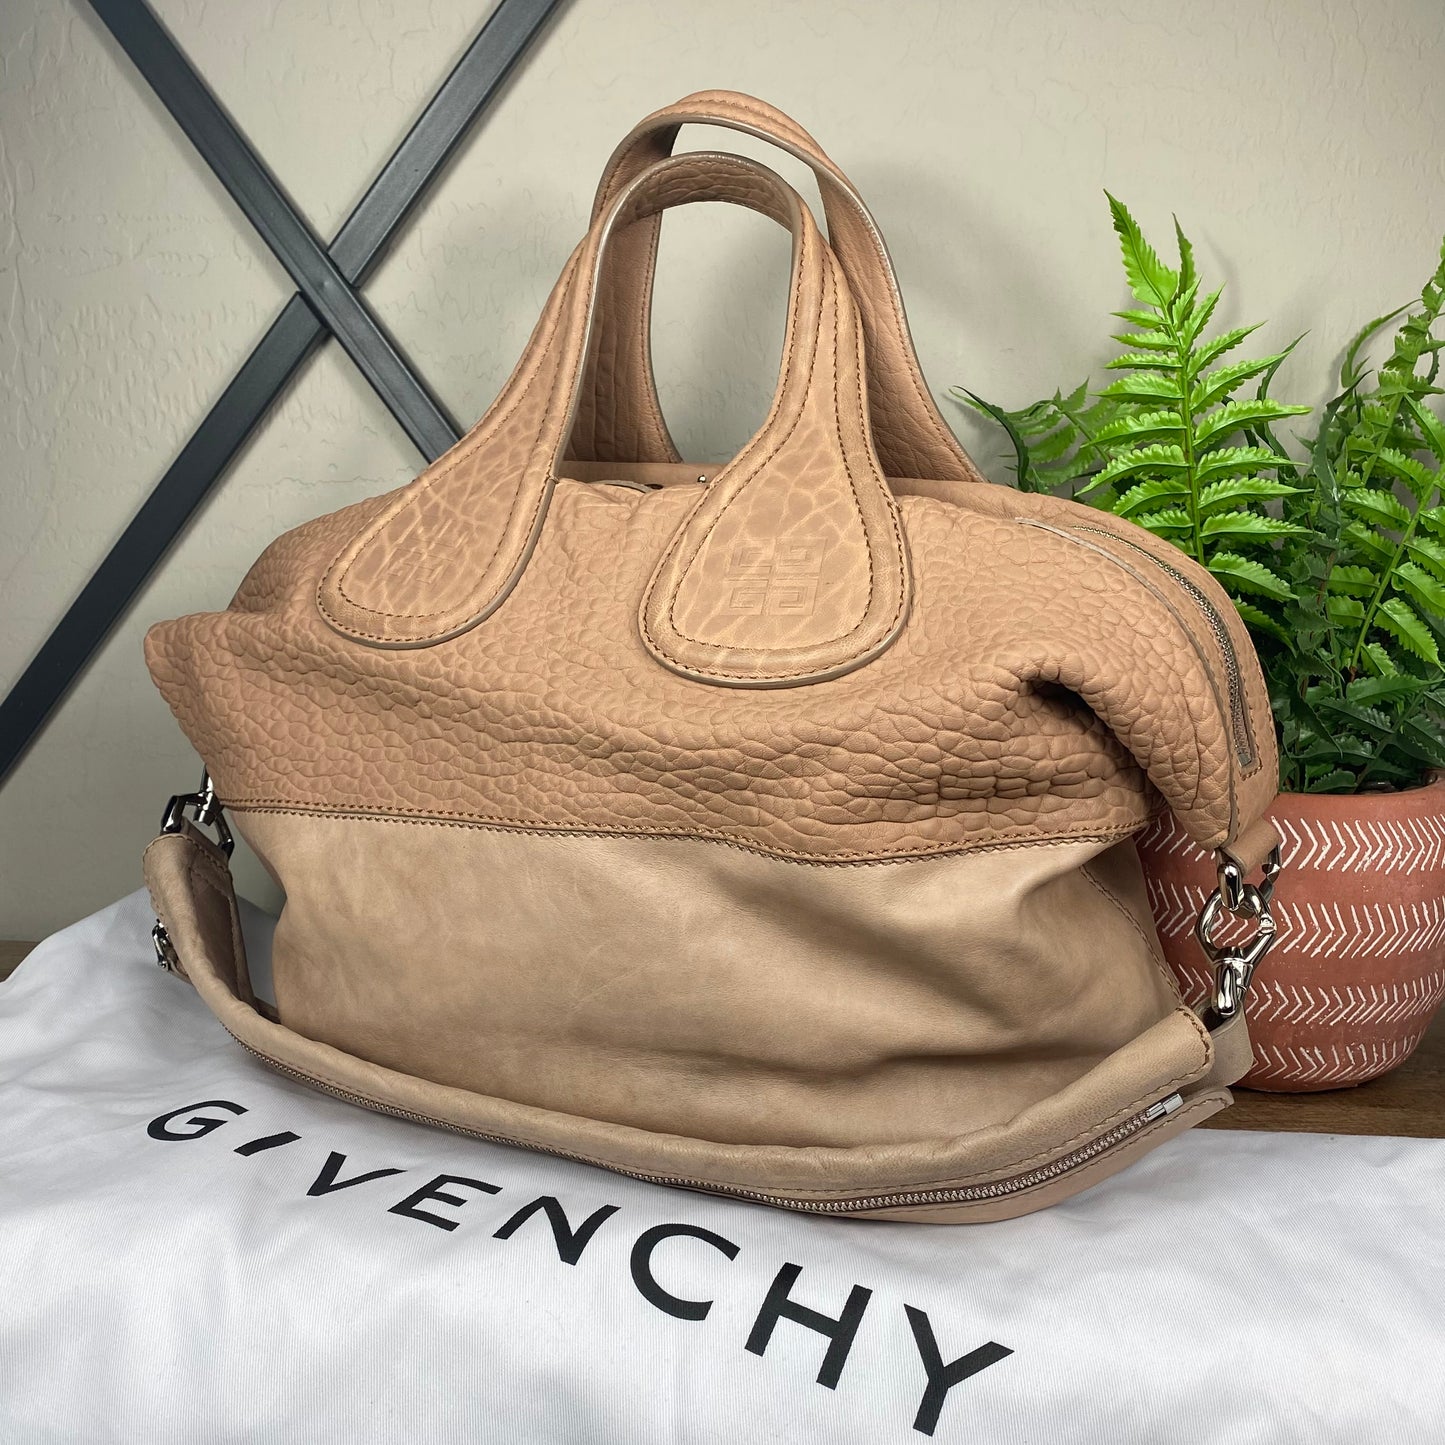 Givenchy Nightingale Two Tone Textured Satchel